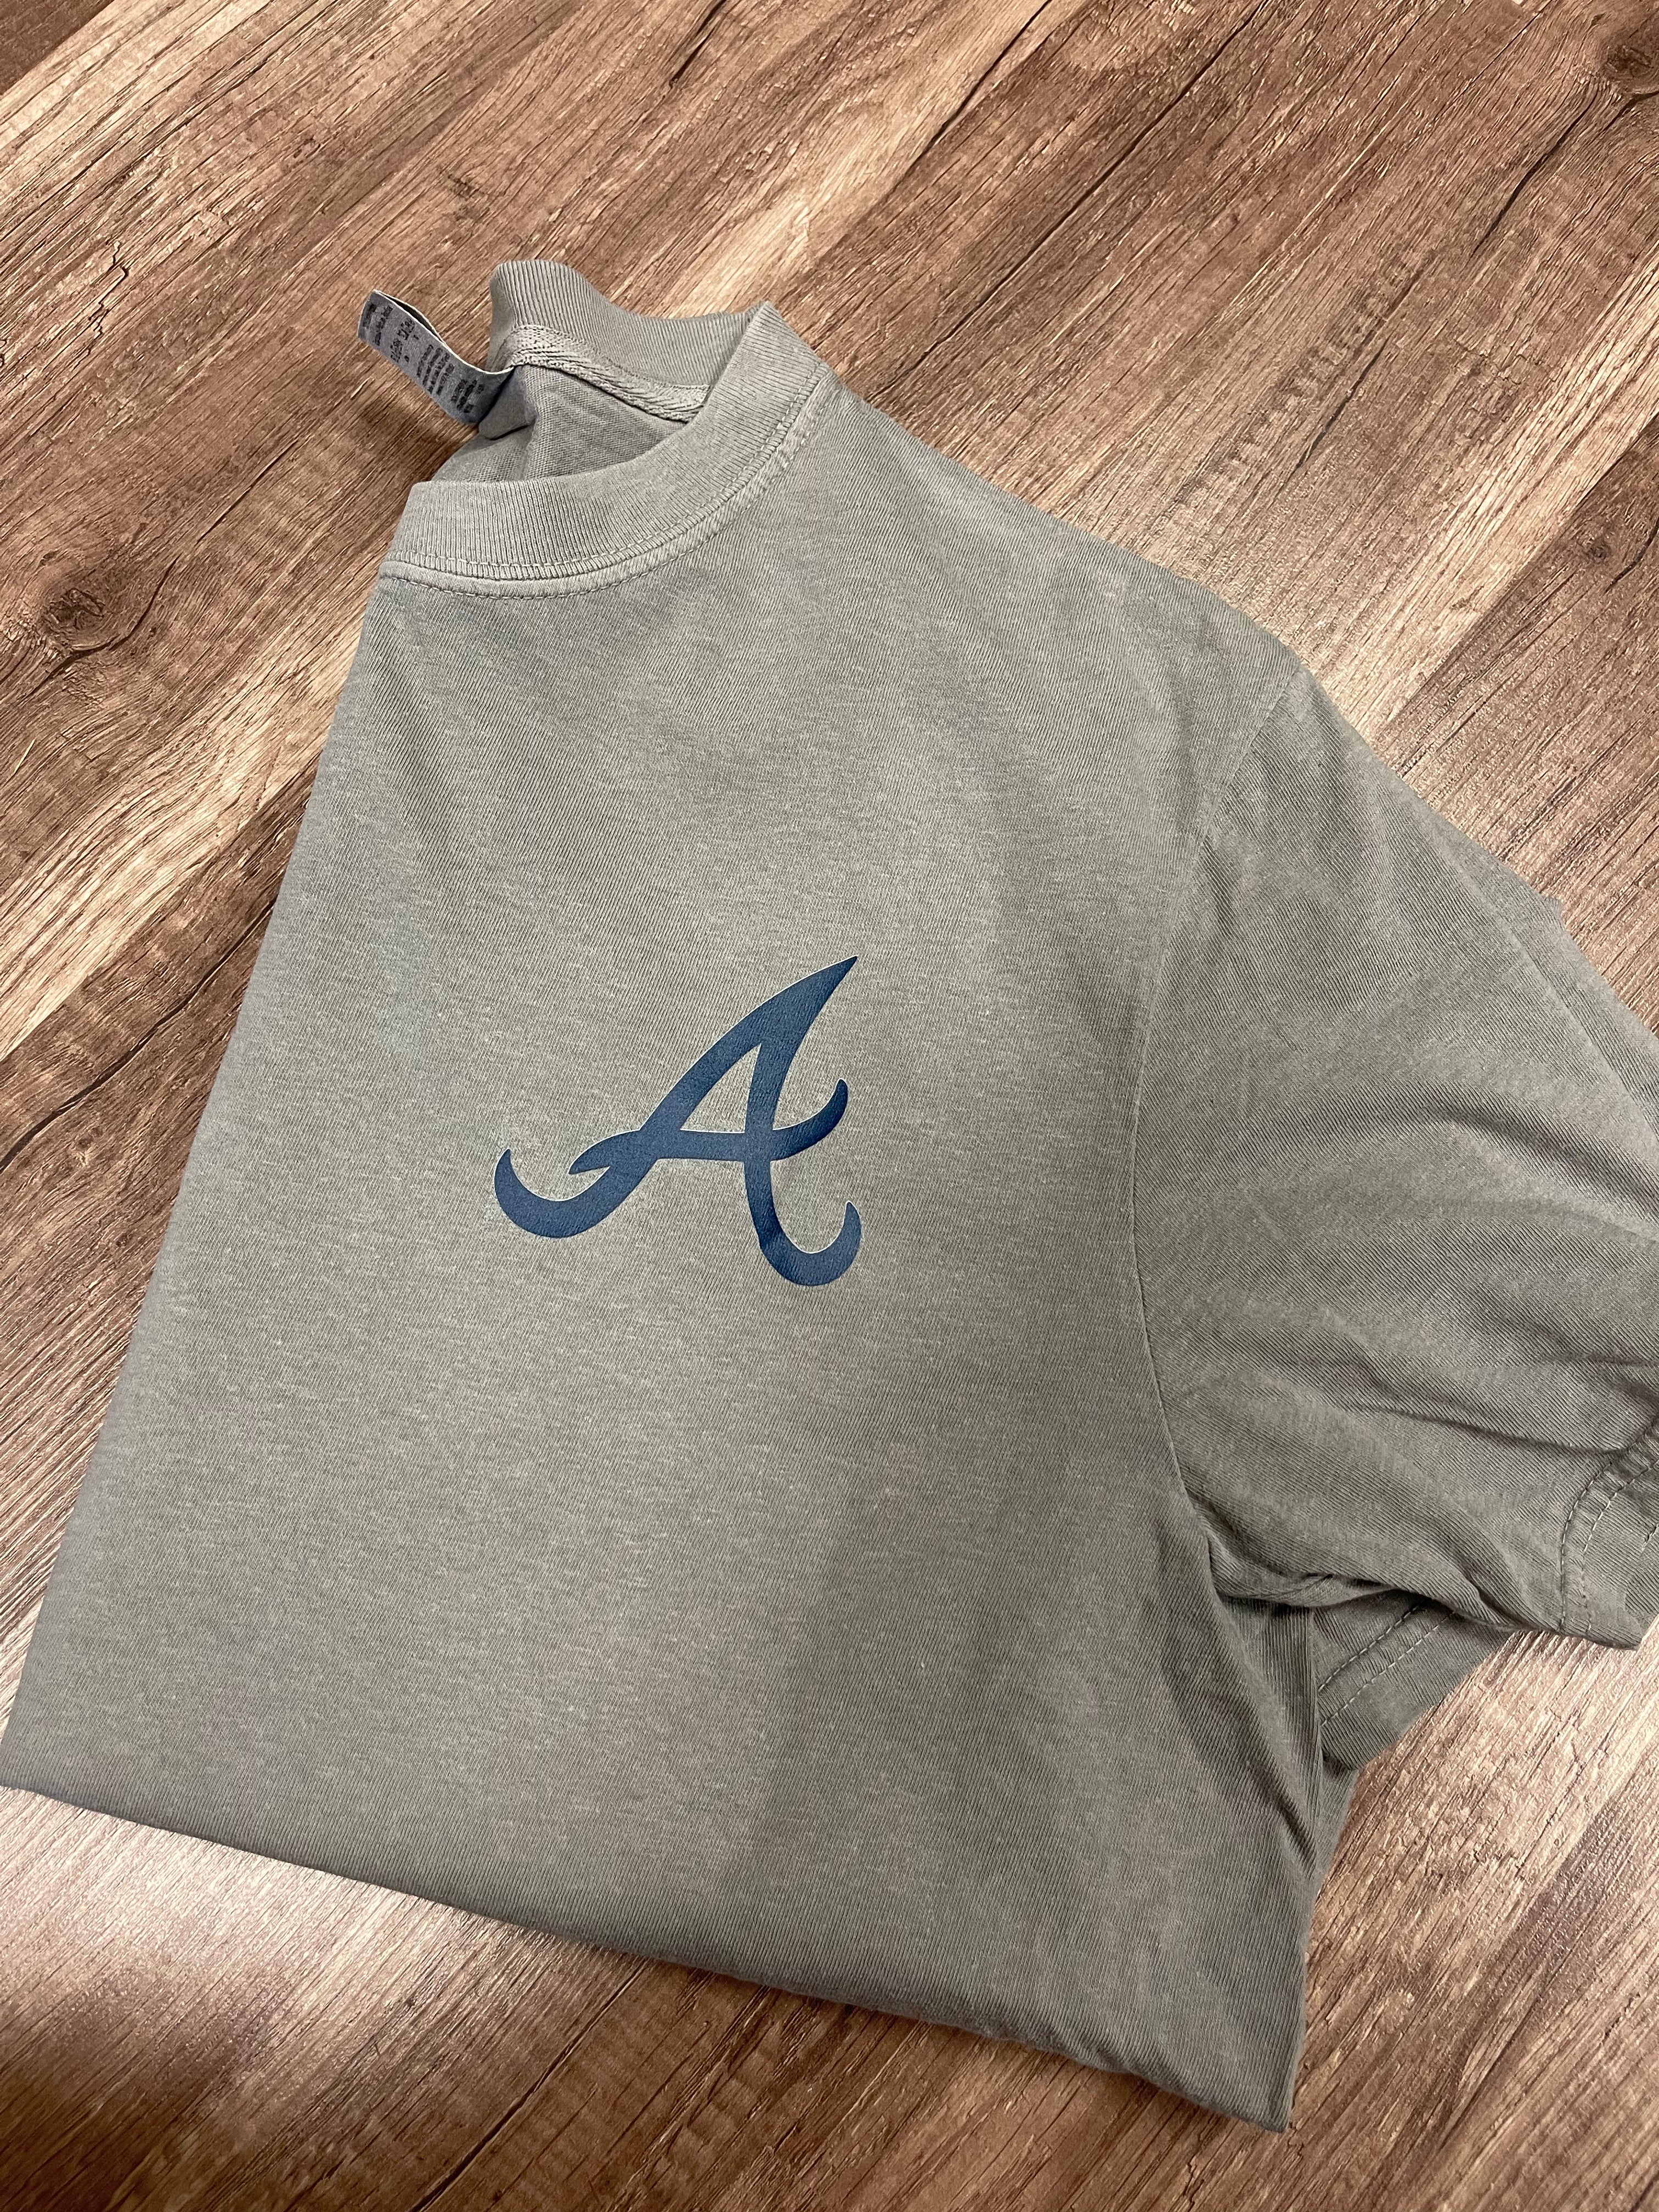 Braves FRONT ONLY sequin comfort color